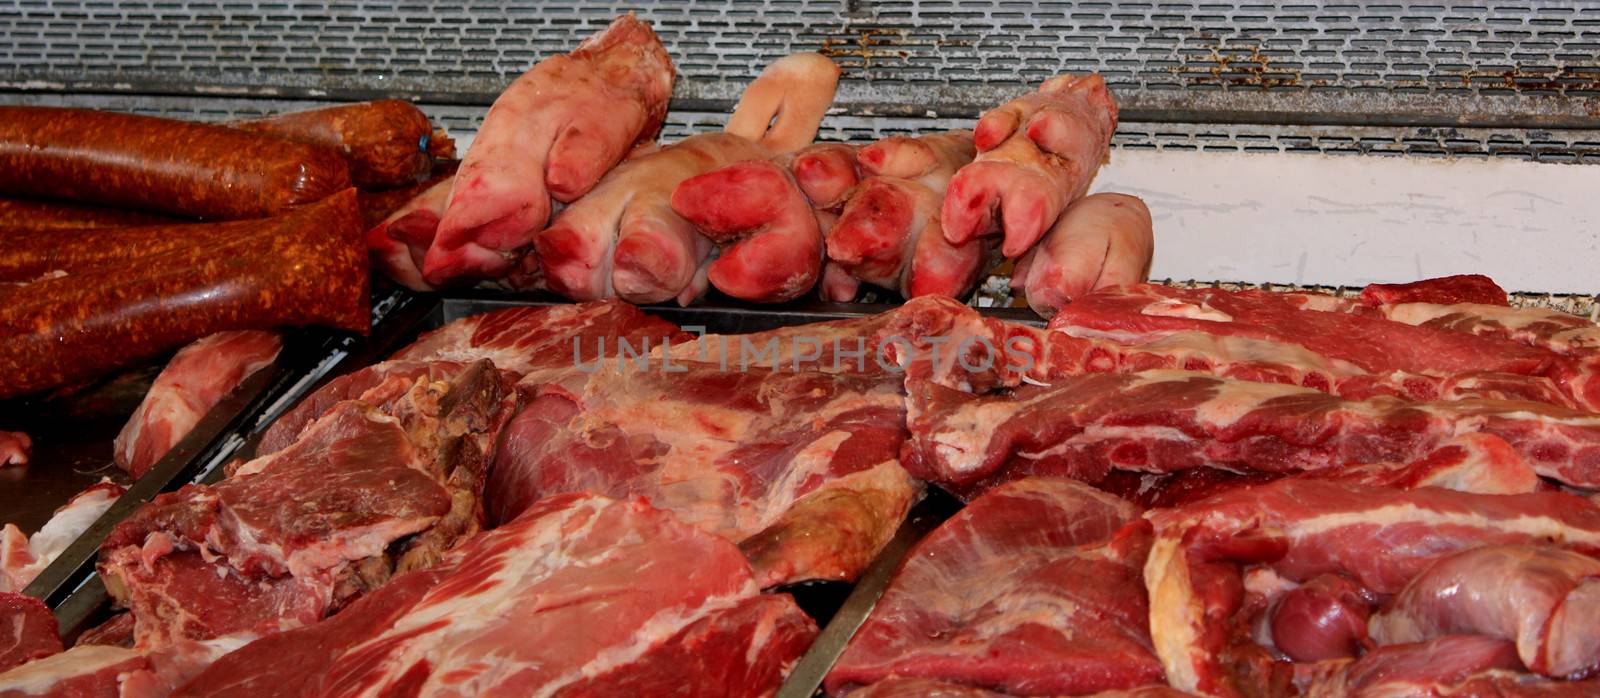 Pig's Feet, Sauage and Chops by mpk1970